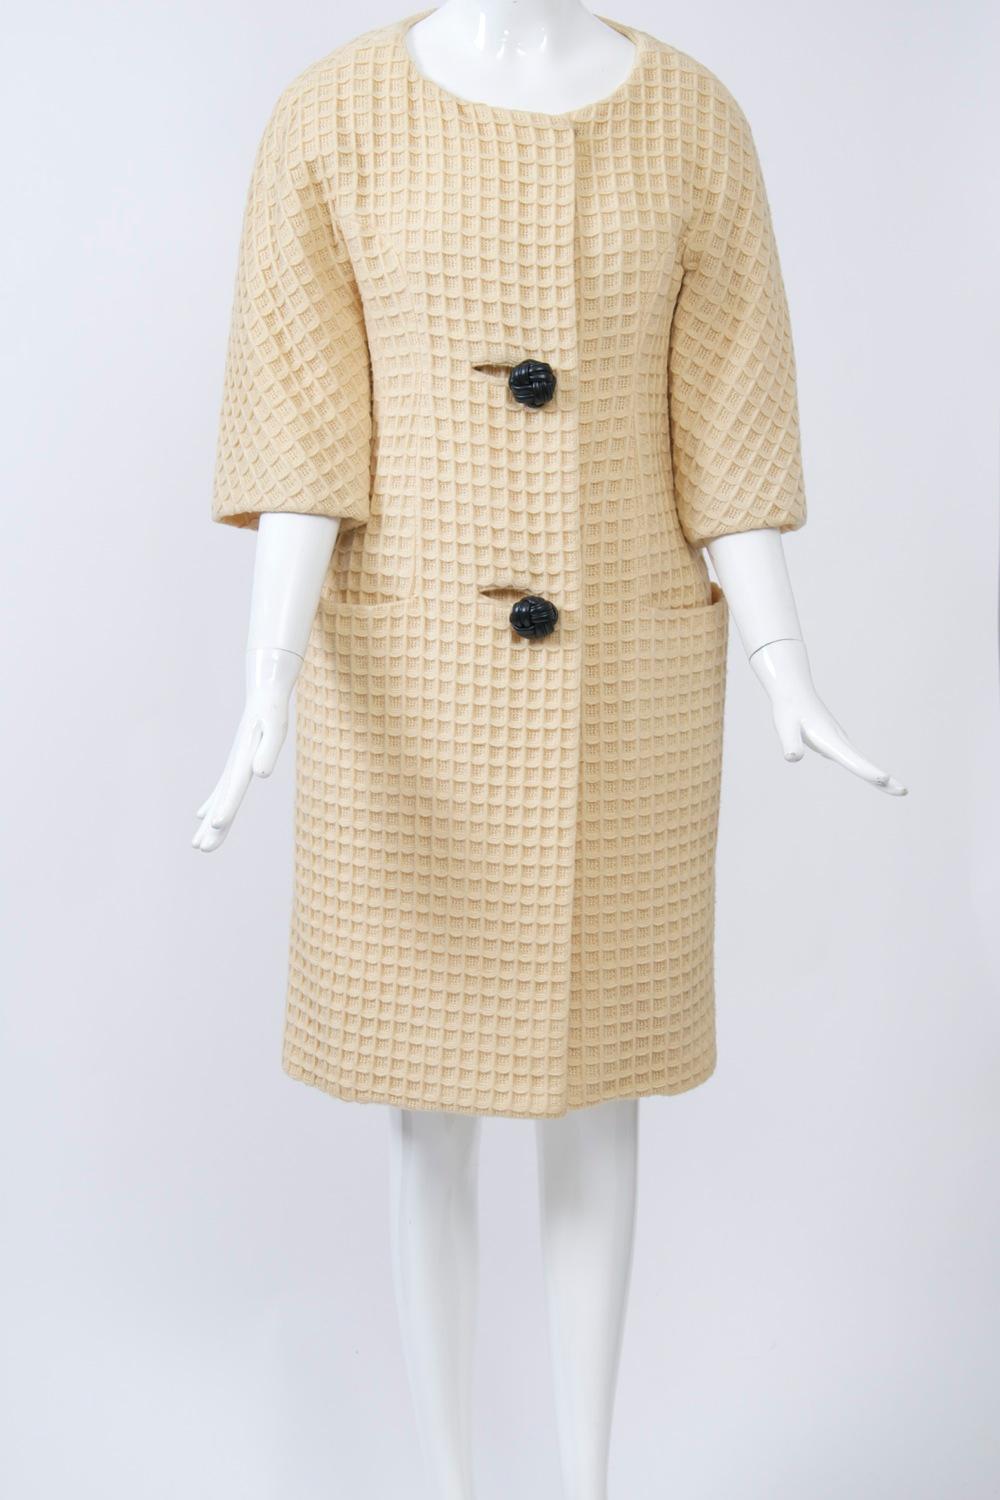 This iconic 1960s coat was designed by Jacques Tiffeau, a transplanted French designer who was extremely influential during the 1960s and was the recipient of two Coty awards. He was particularly admired for his coat designs that were spare and